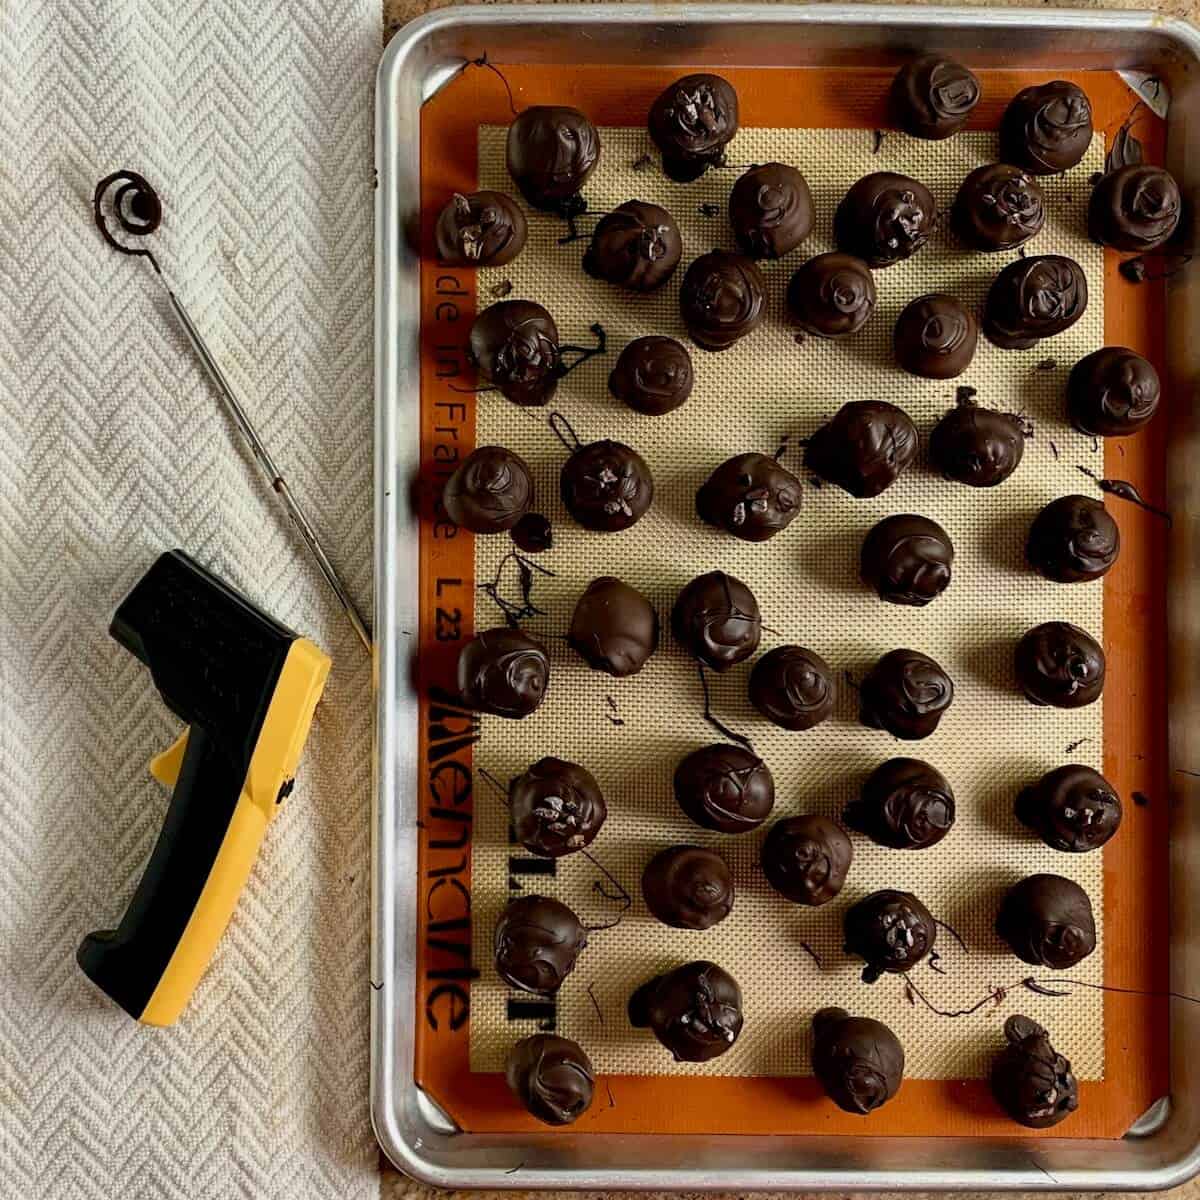 Chocolate cake truffles on a baking pan with infrared temperature gun & dipping tool from overhead.